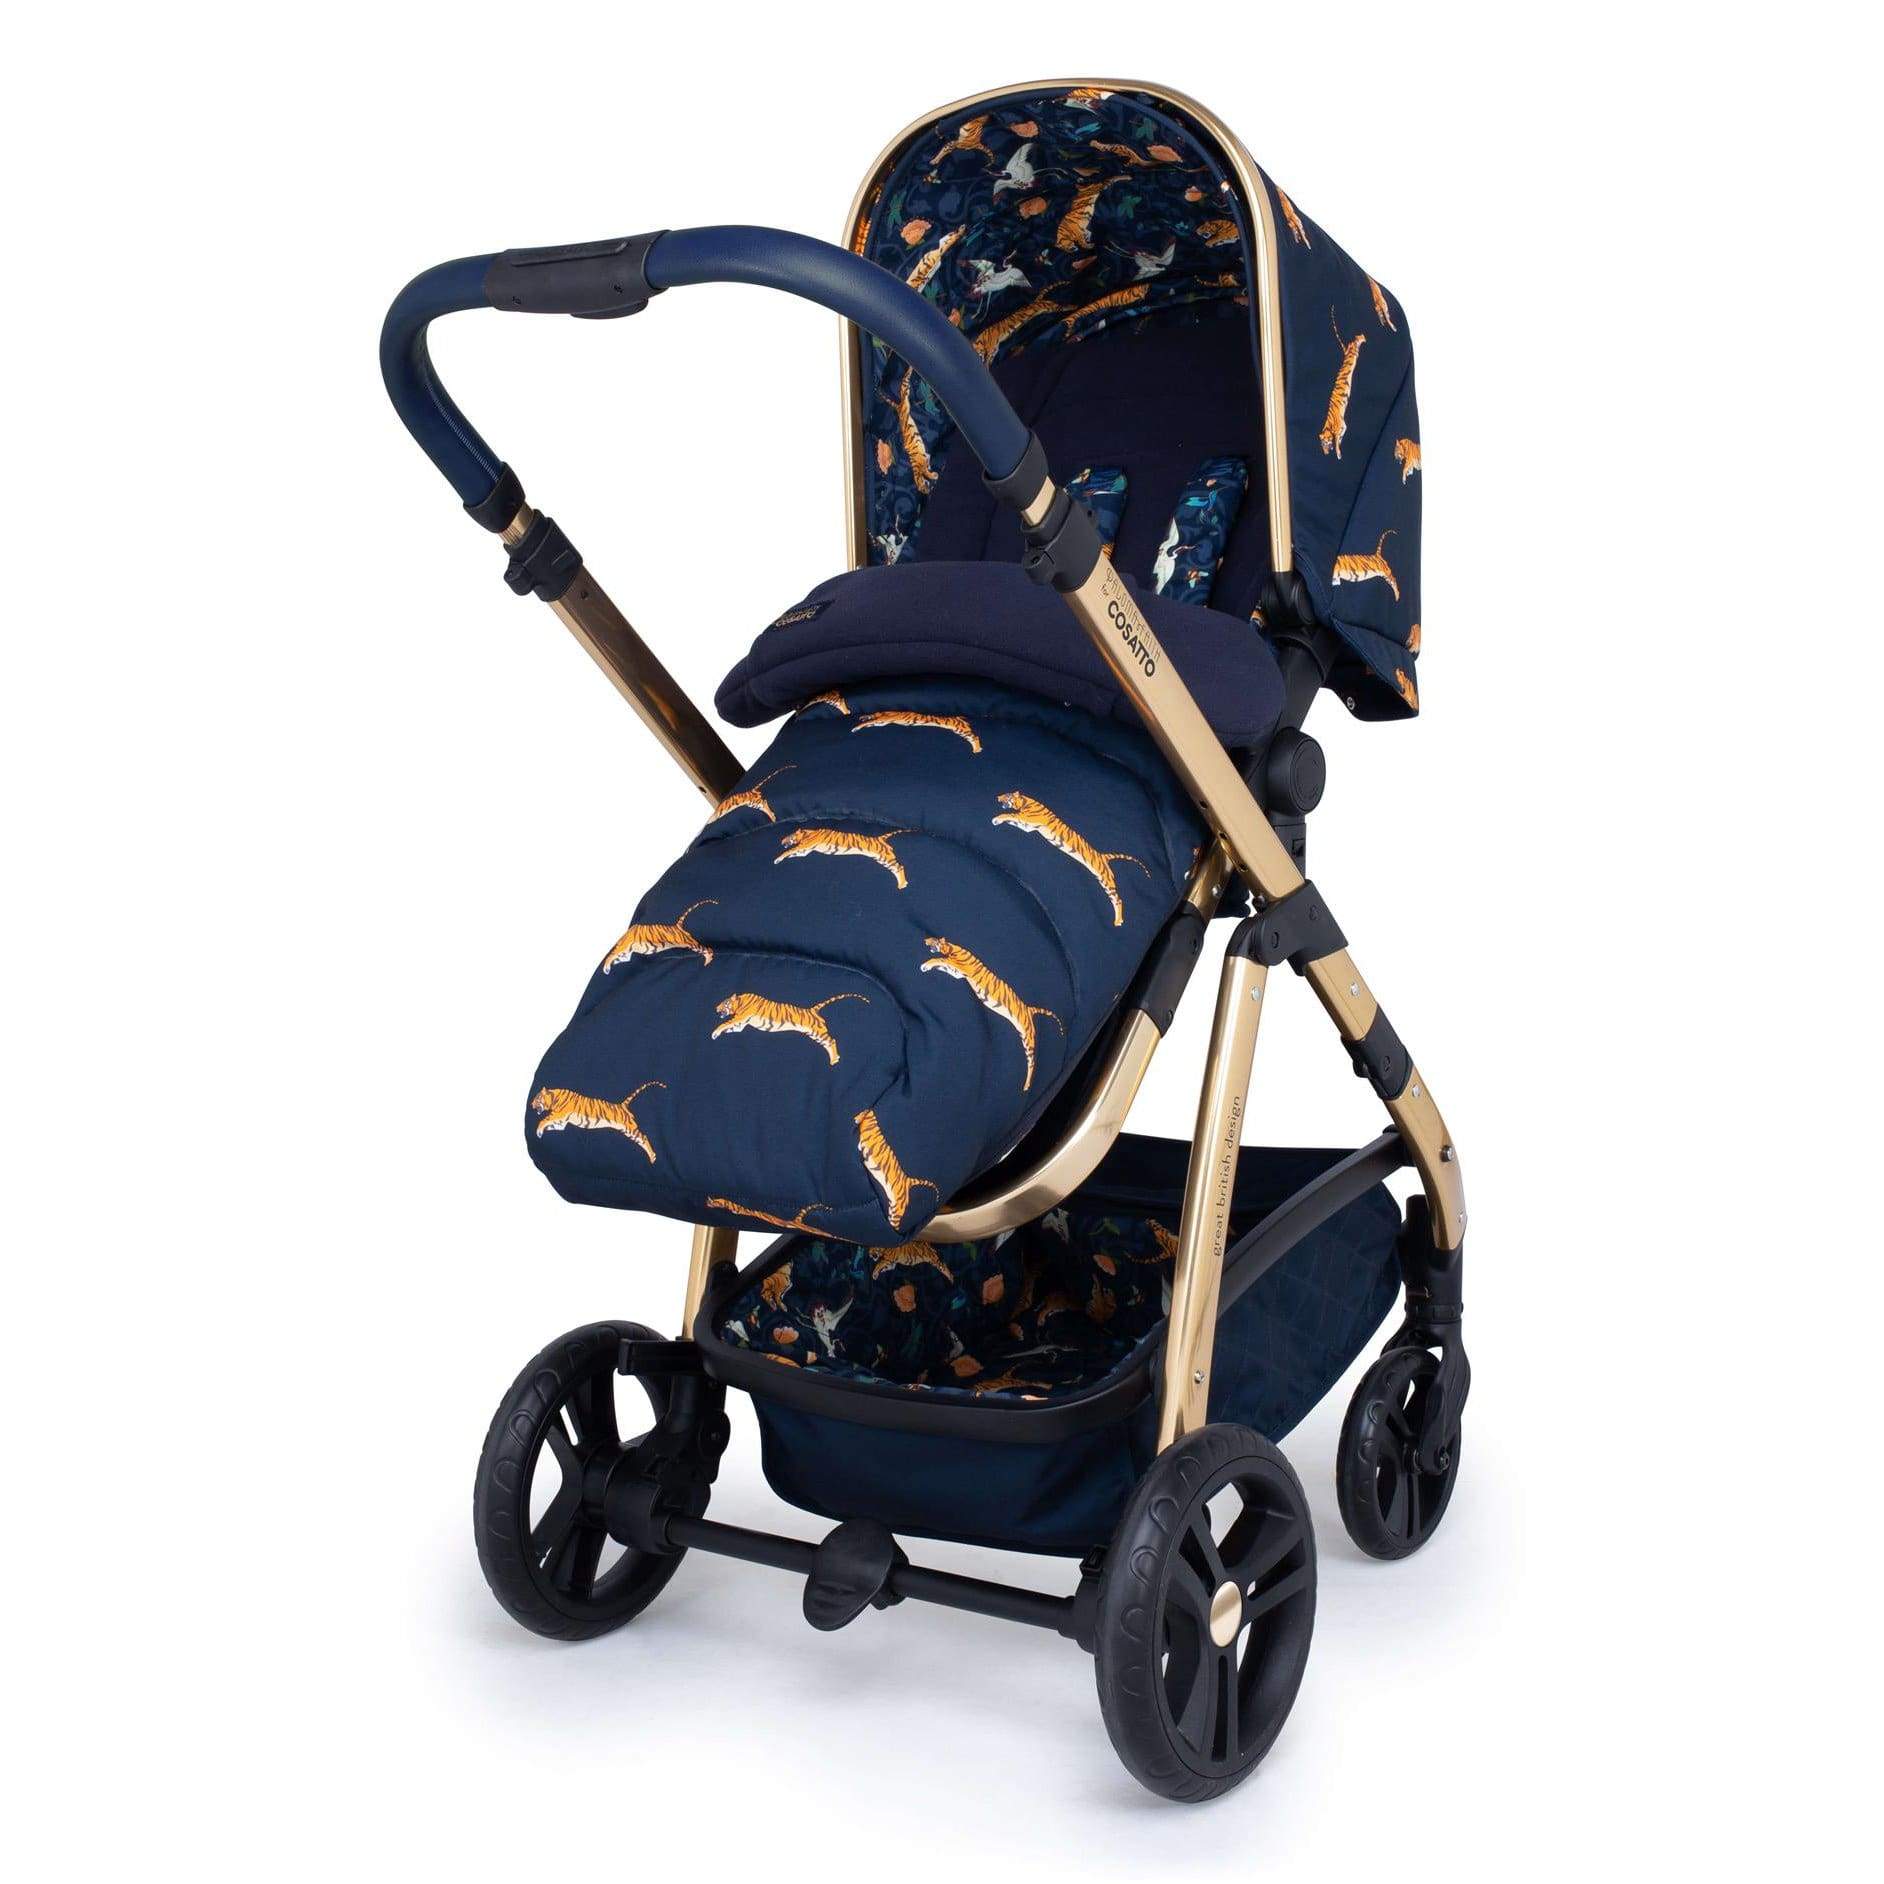 Cosatto baby prams Cosatto Wow Pram & Accessories On The Prowl Special Edition CT4431